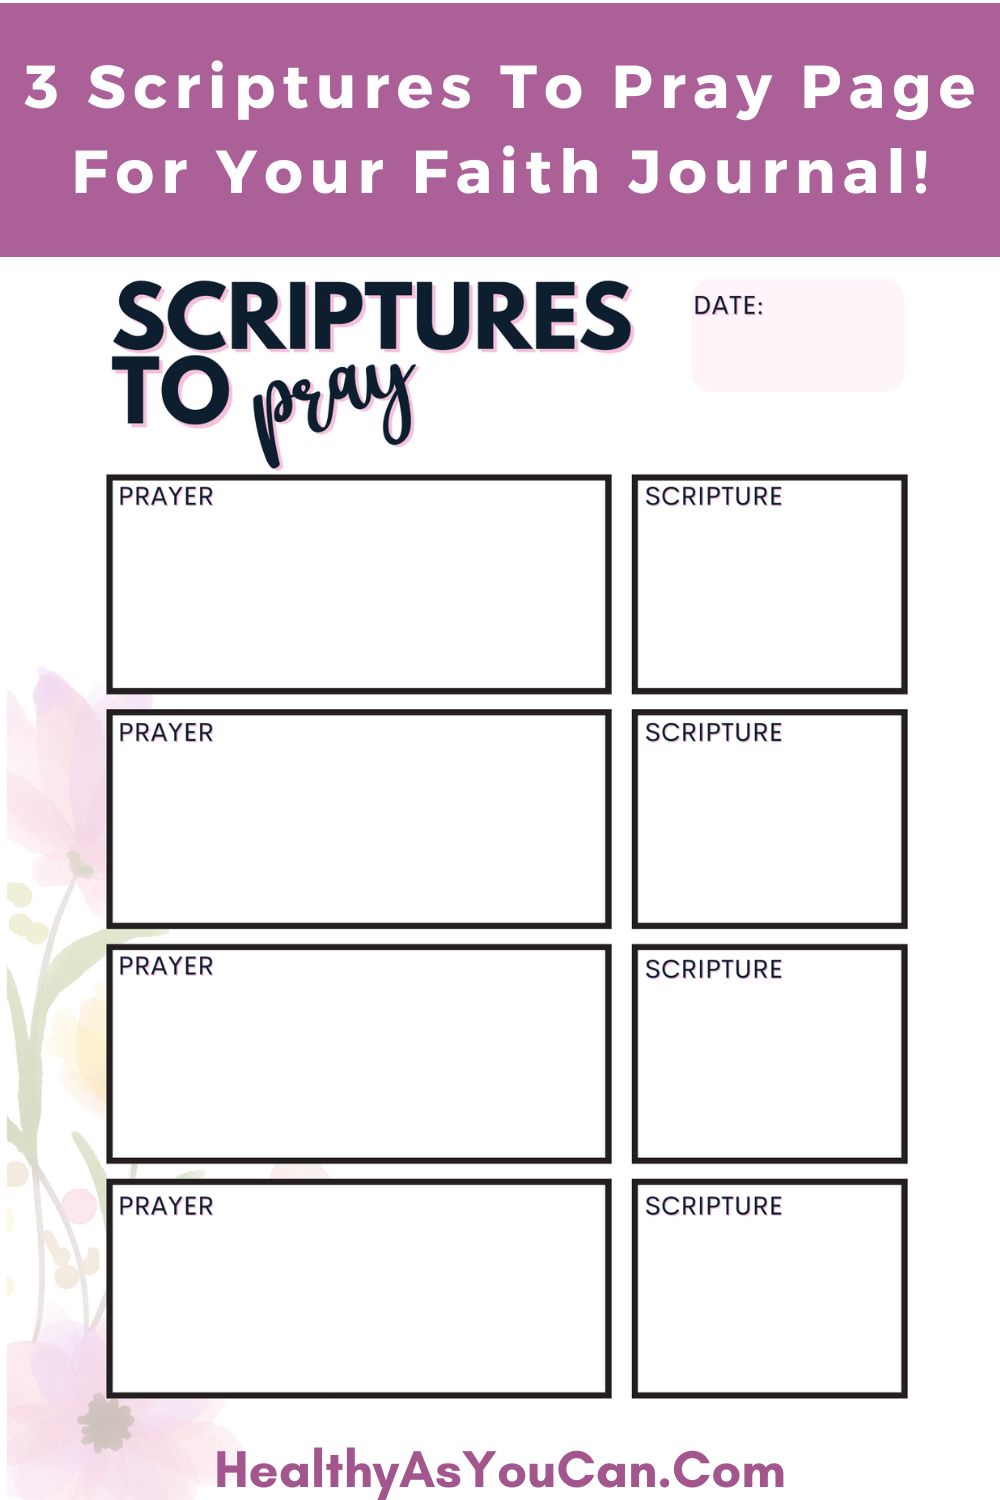 Scriptures To Pray Page with purple flowers